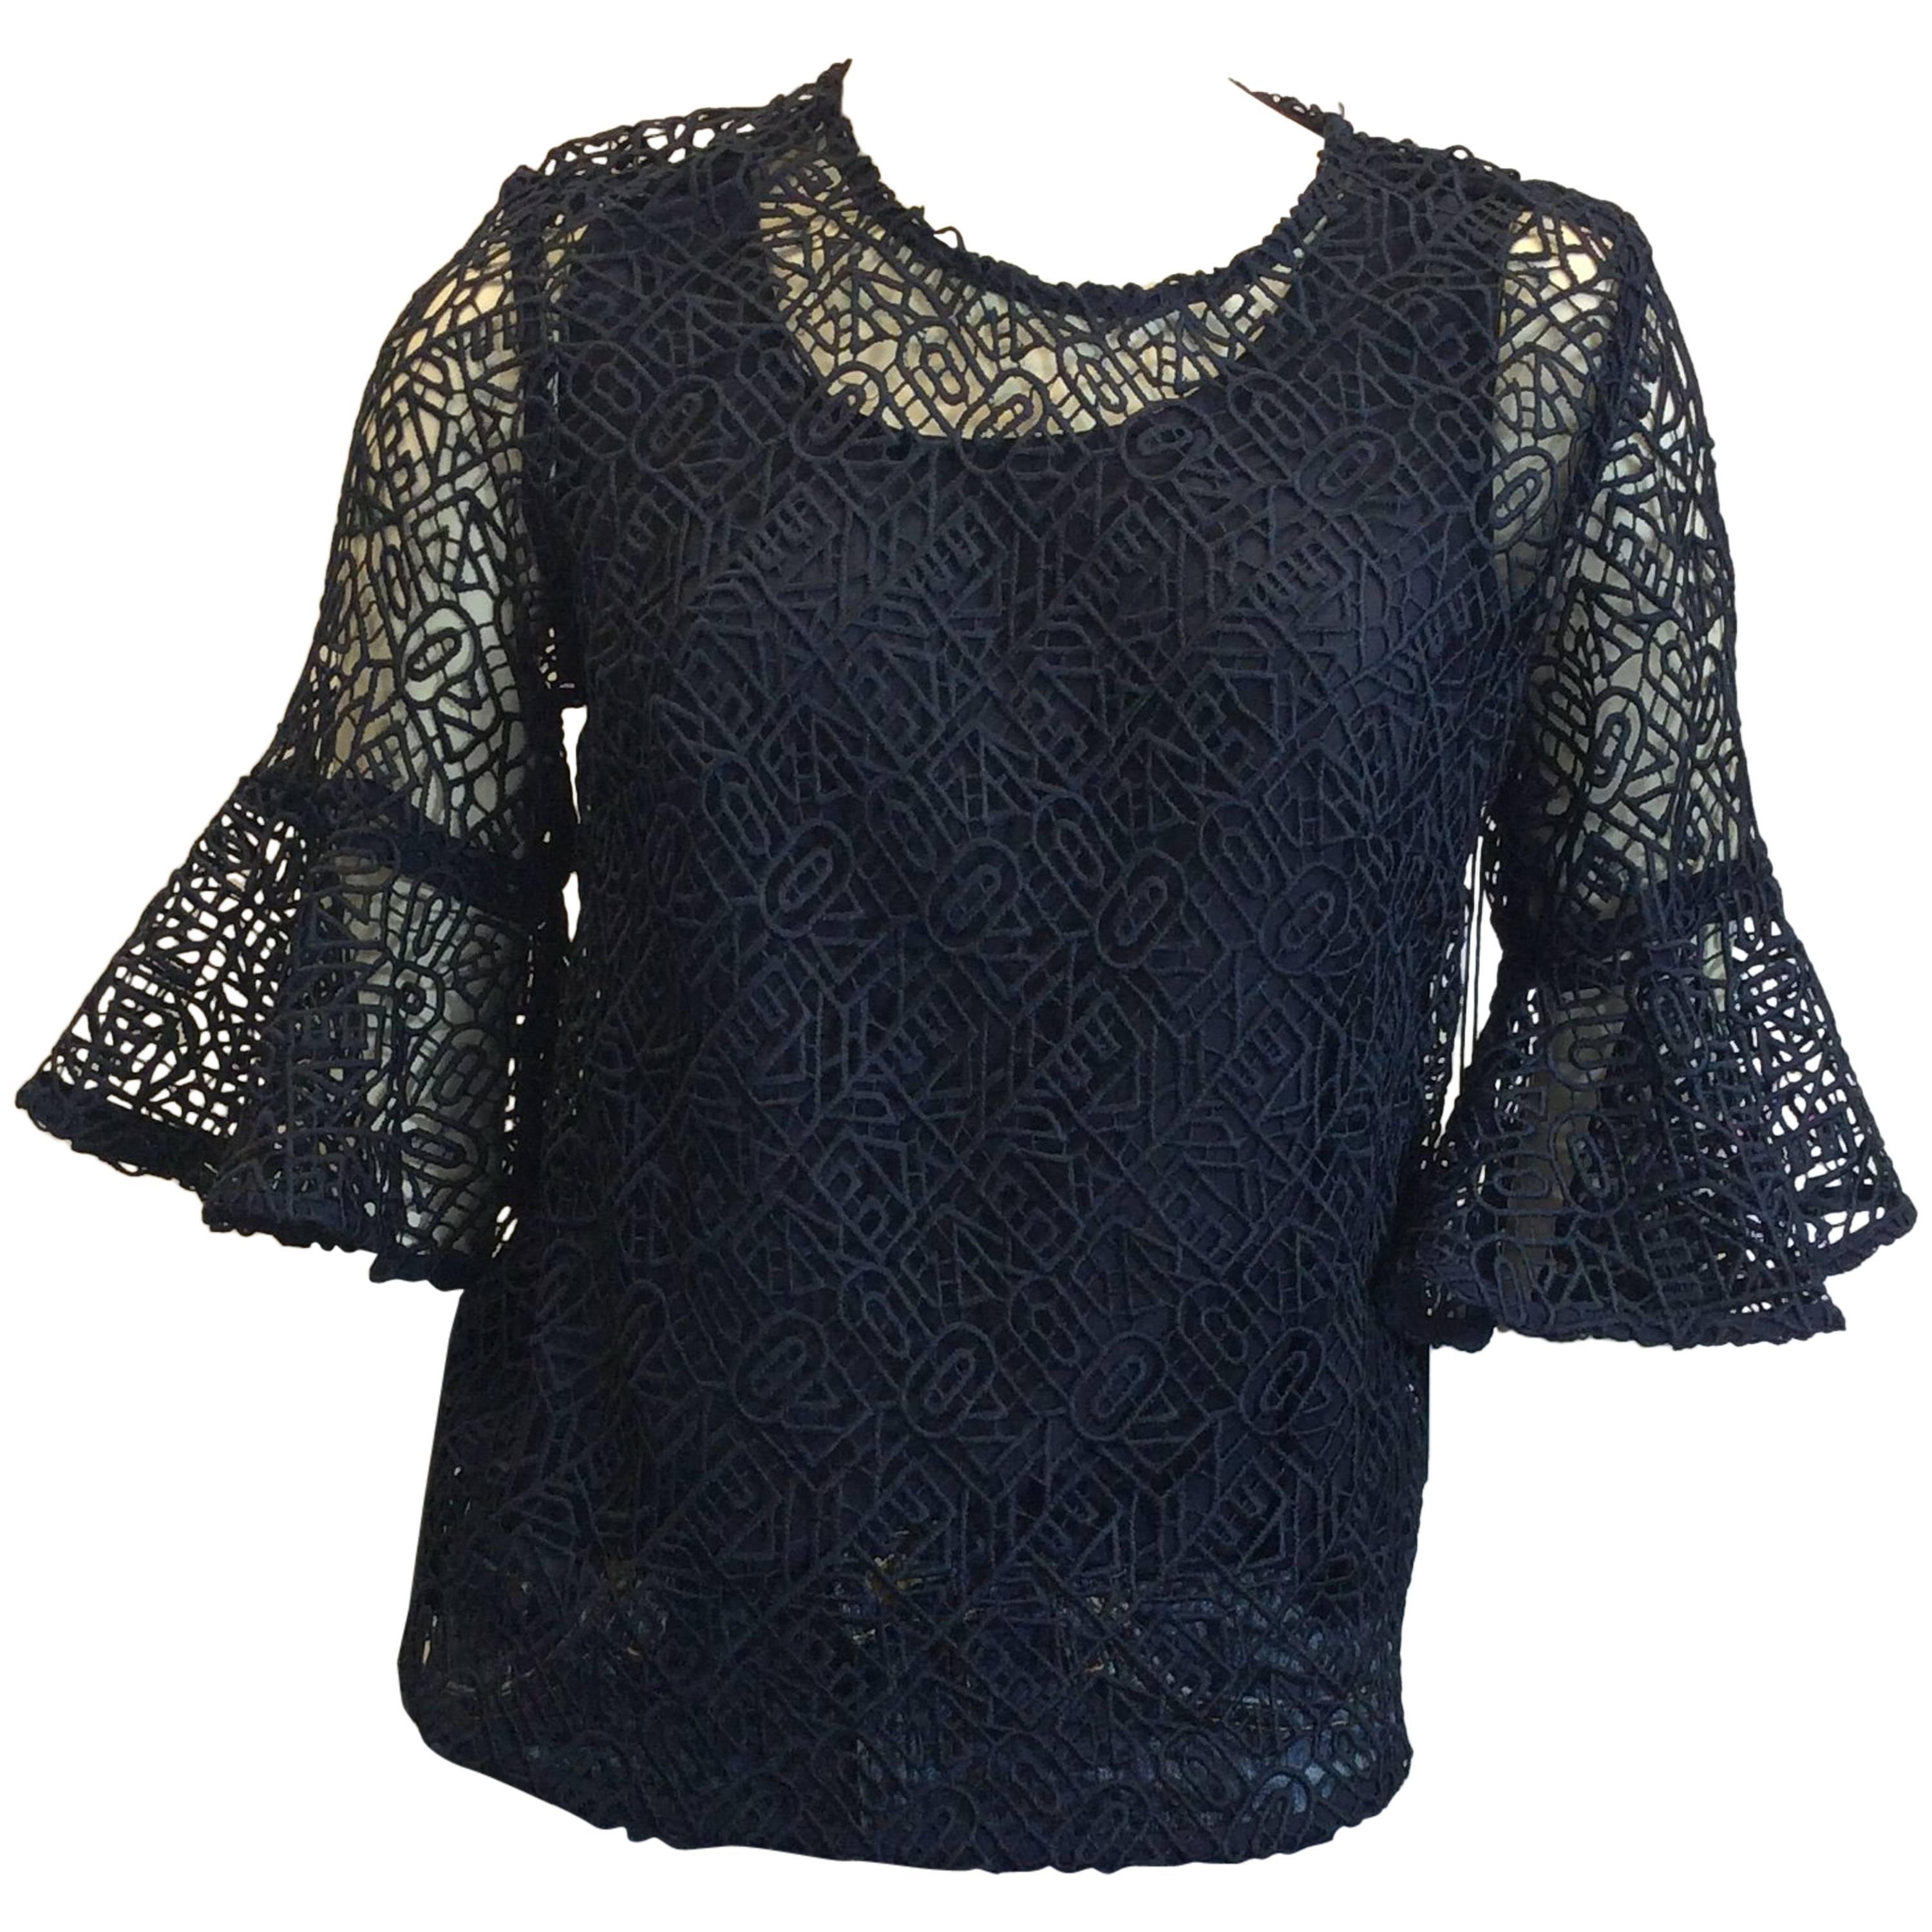 Prose & Poetry NWT High Low Lace Navy Top